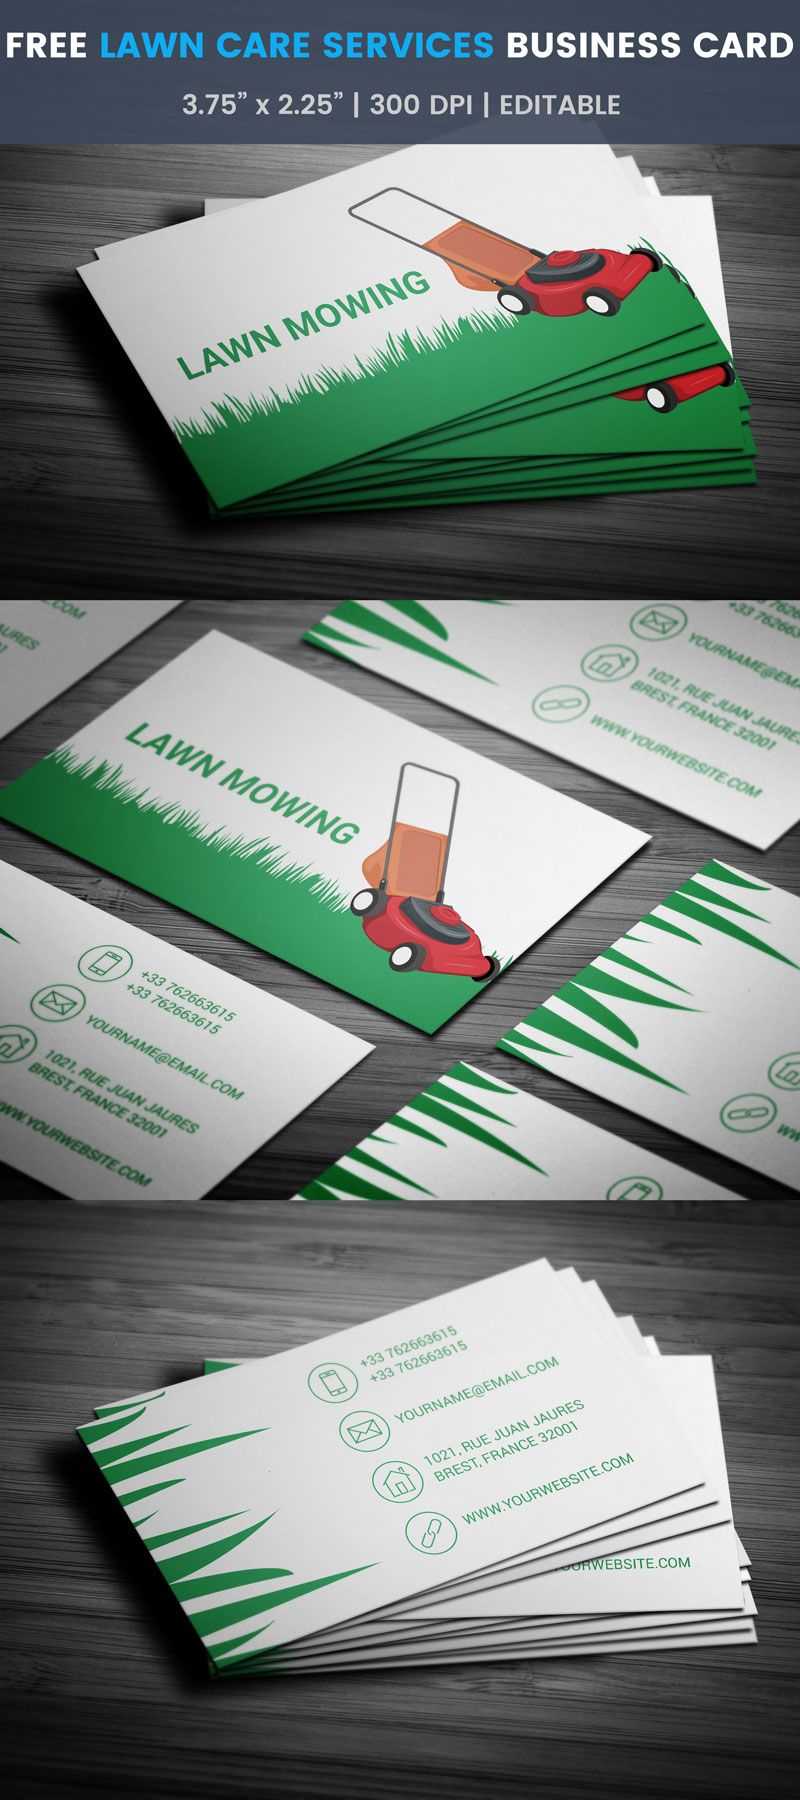 Lawn Care Services Business Card - Full Preview | Free Inside Lawn Care Business Cards Templates Free